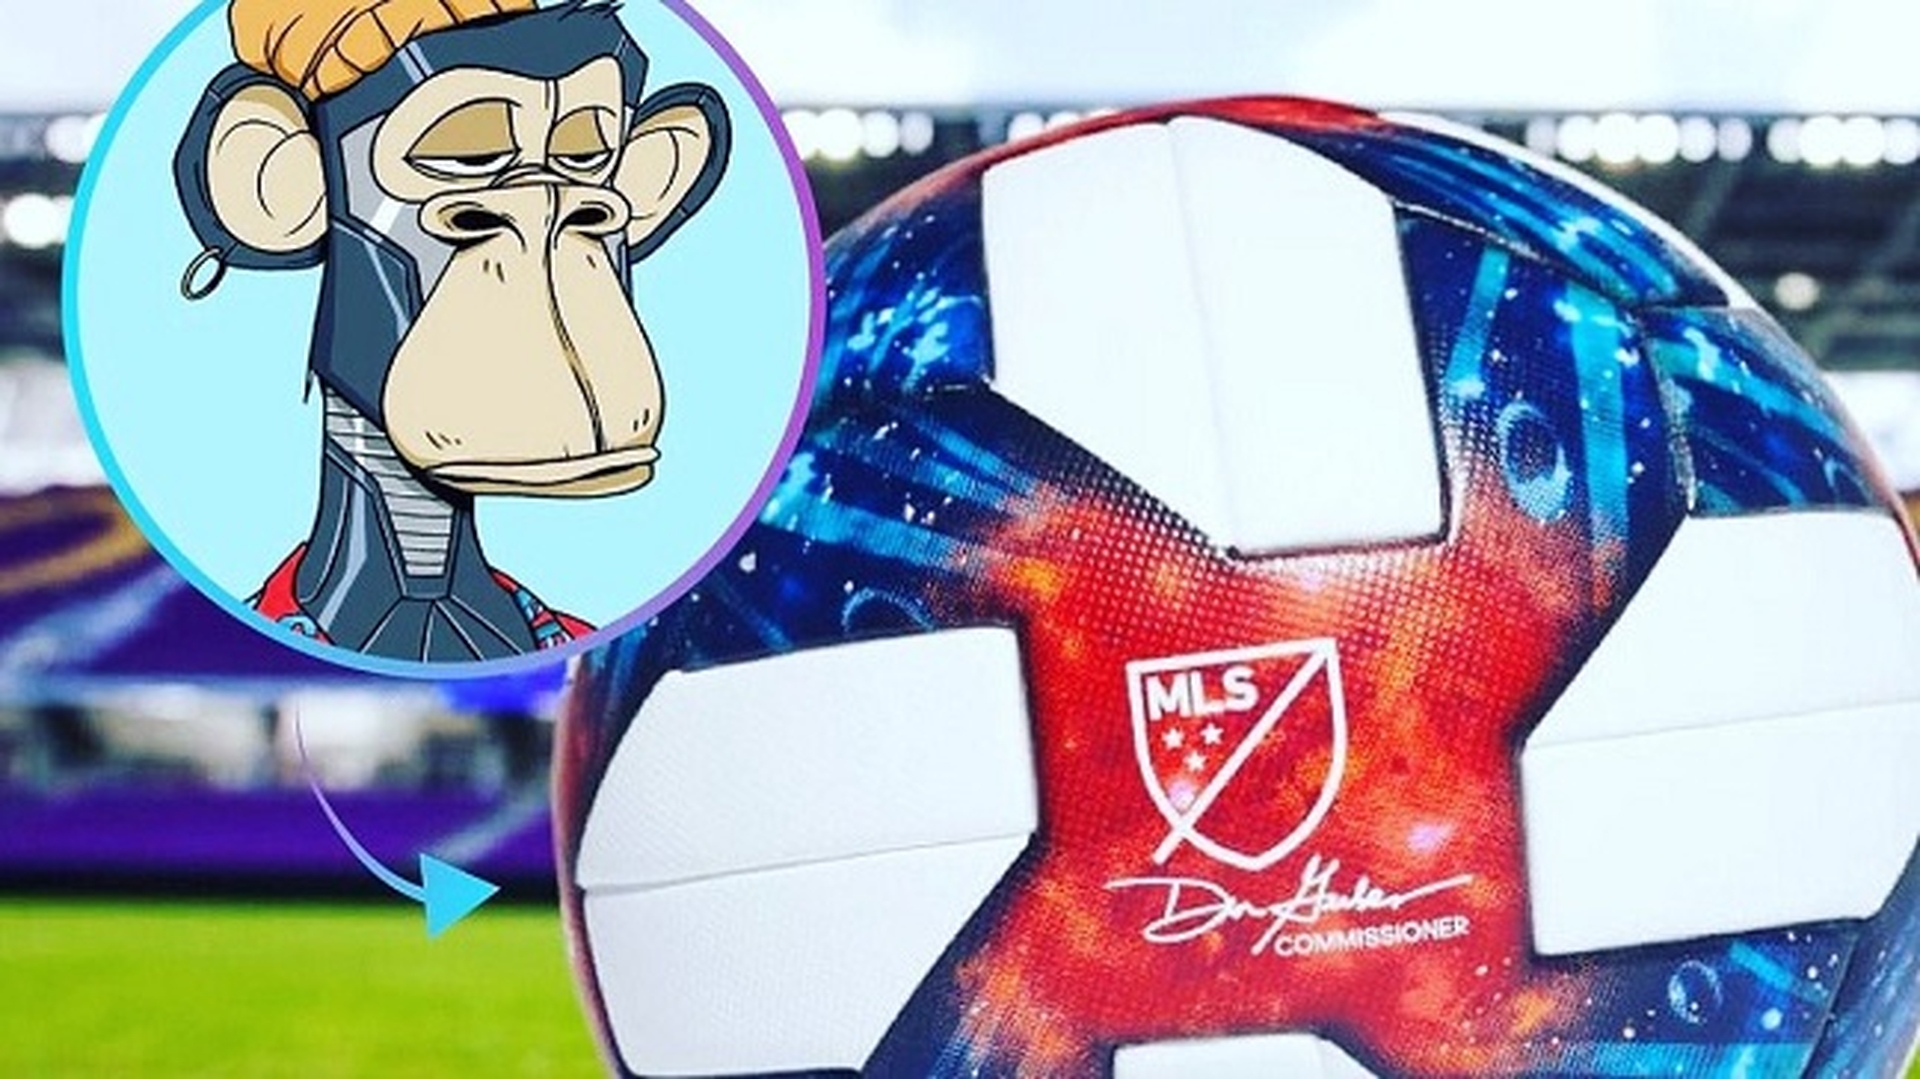 With the rise of NFT projects, many different publicity stunts are being performed, and the Major League Soccer signs Bored Ape NFT as an athlete.